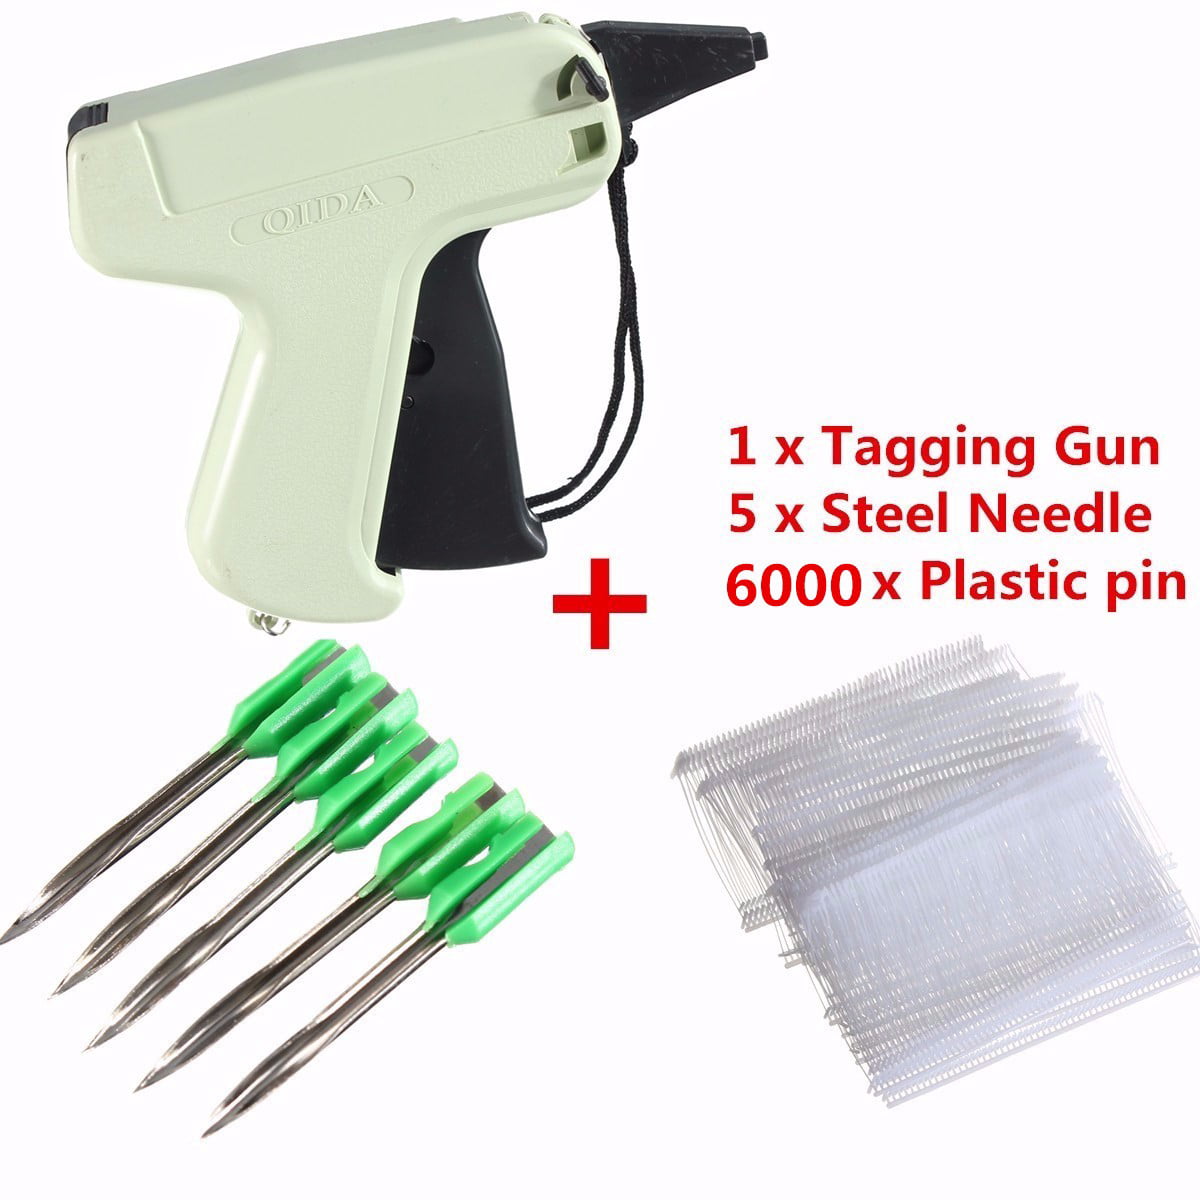 1 Needle For Clothes US Regular Garment Price Label Tagging Tag Gun 2000 Barbs 